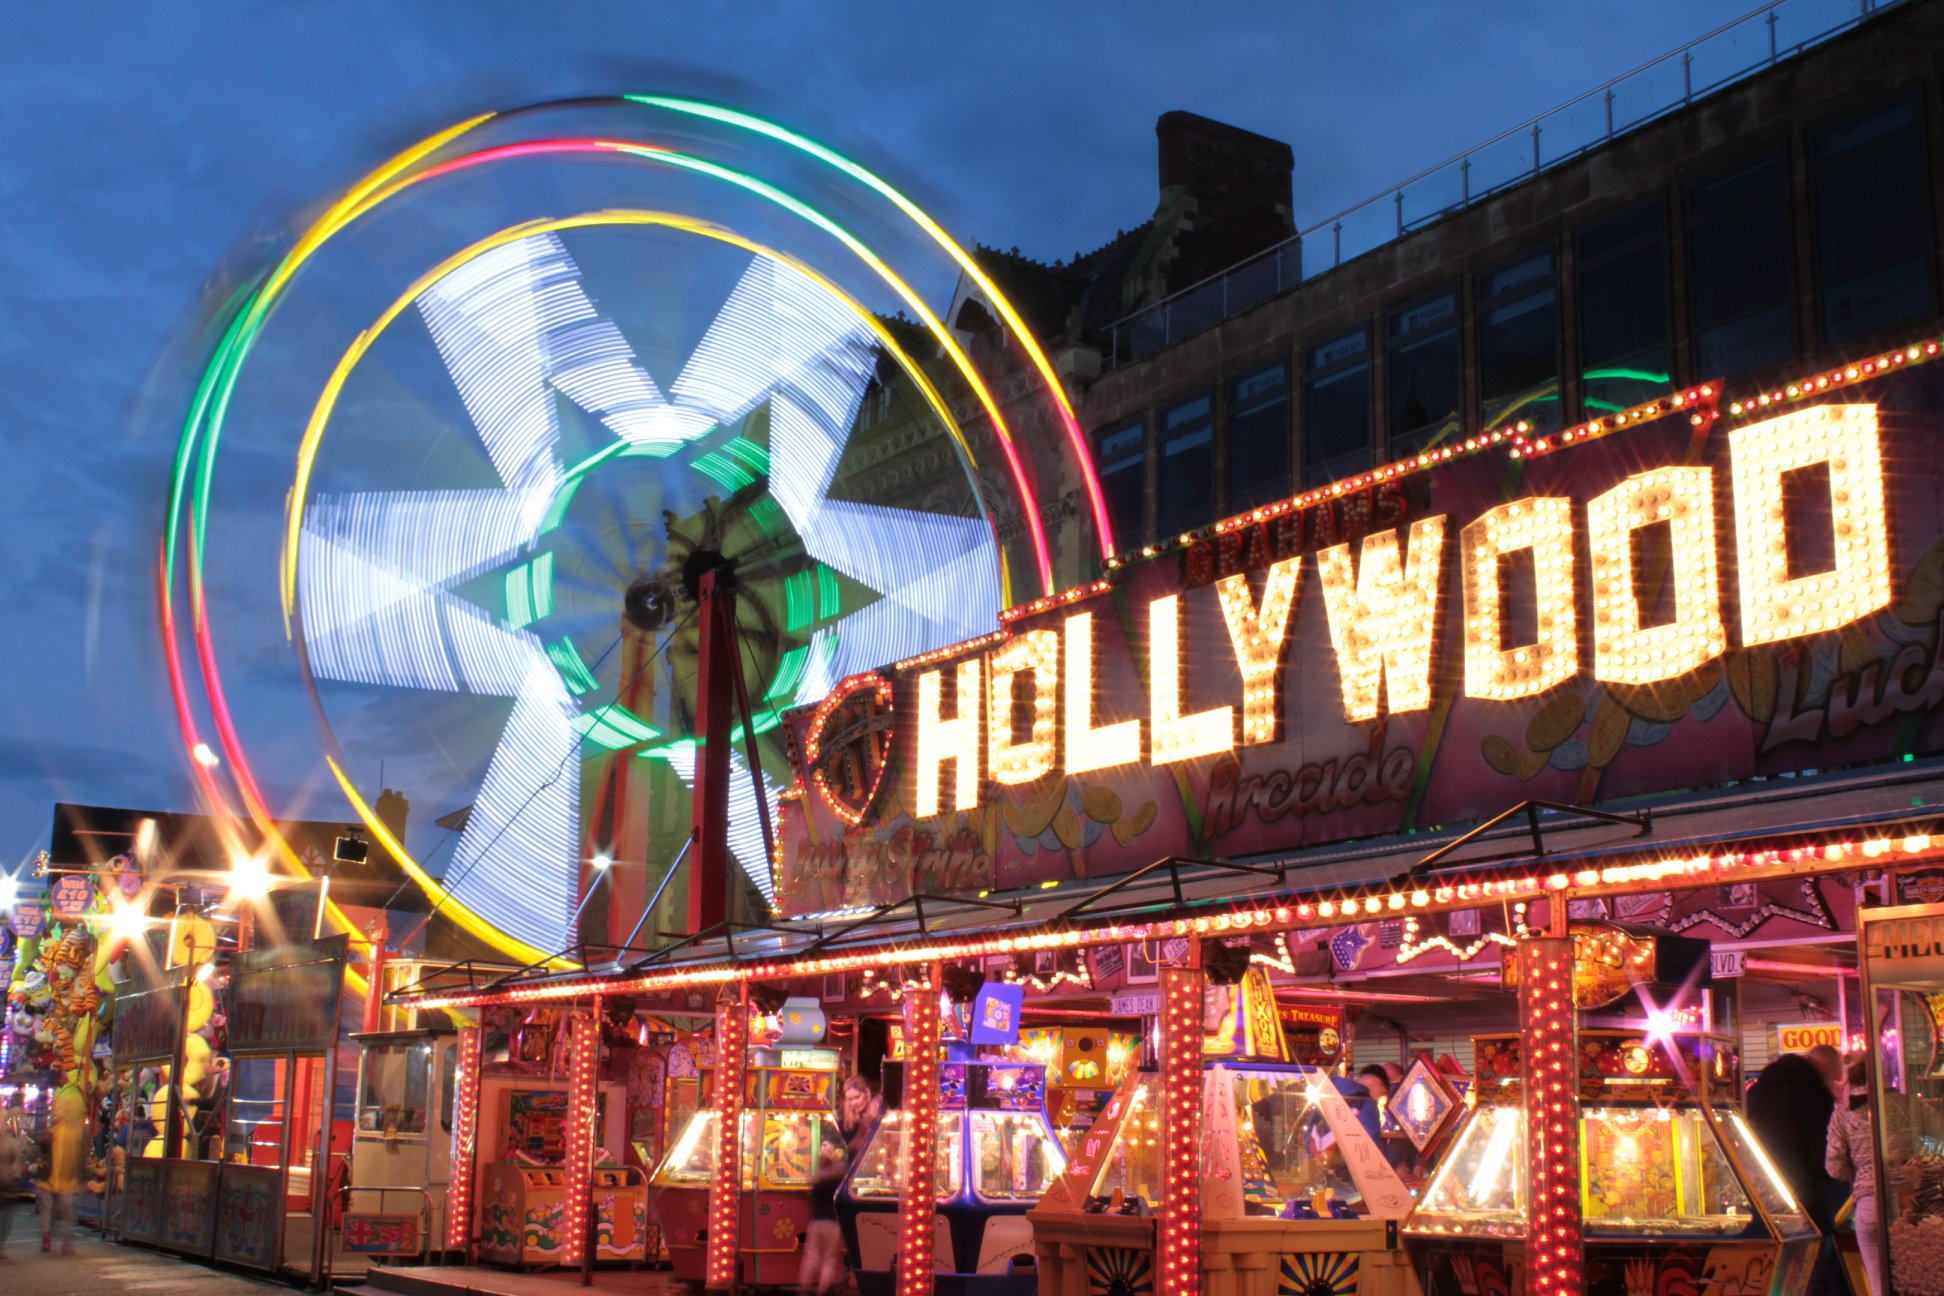 NEWS | Hereford May Fair expected to be cancelled for second consecutive year due to COVID-19